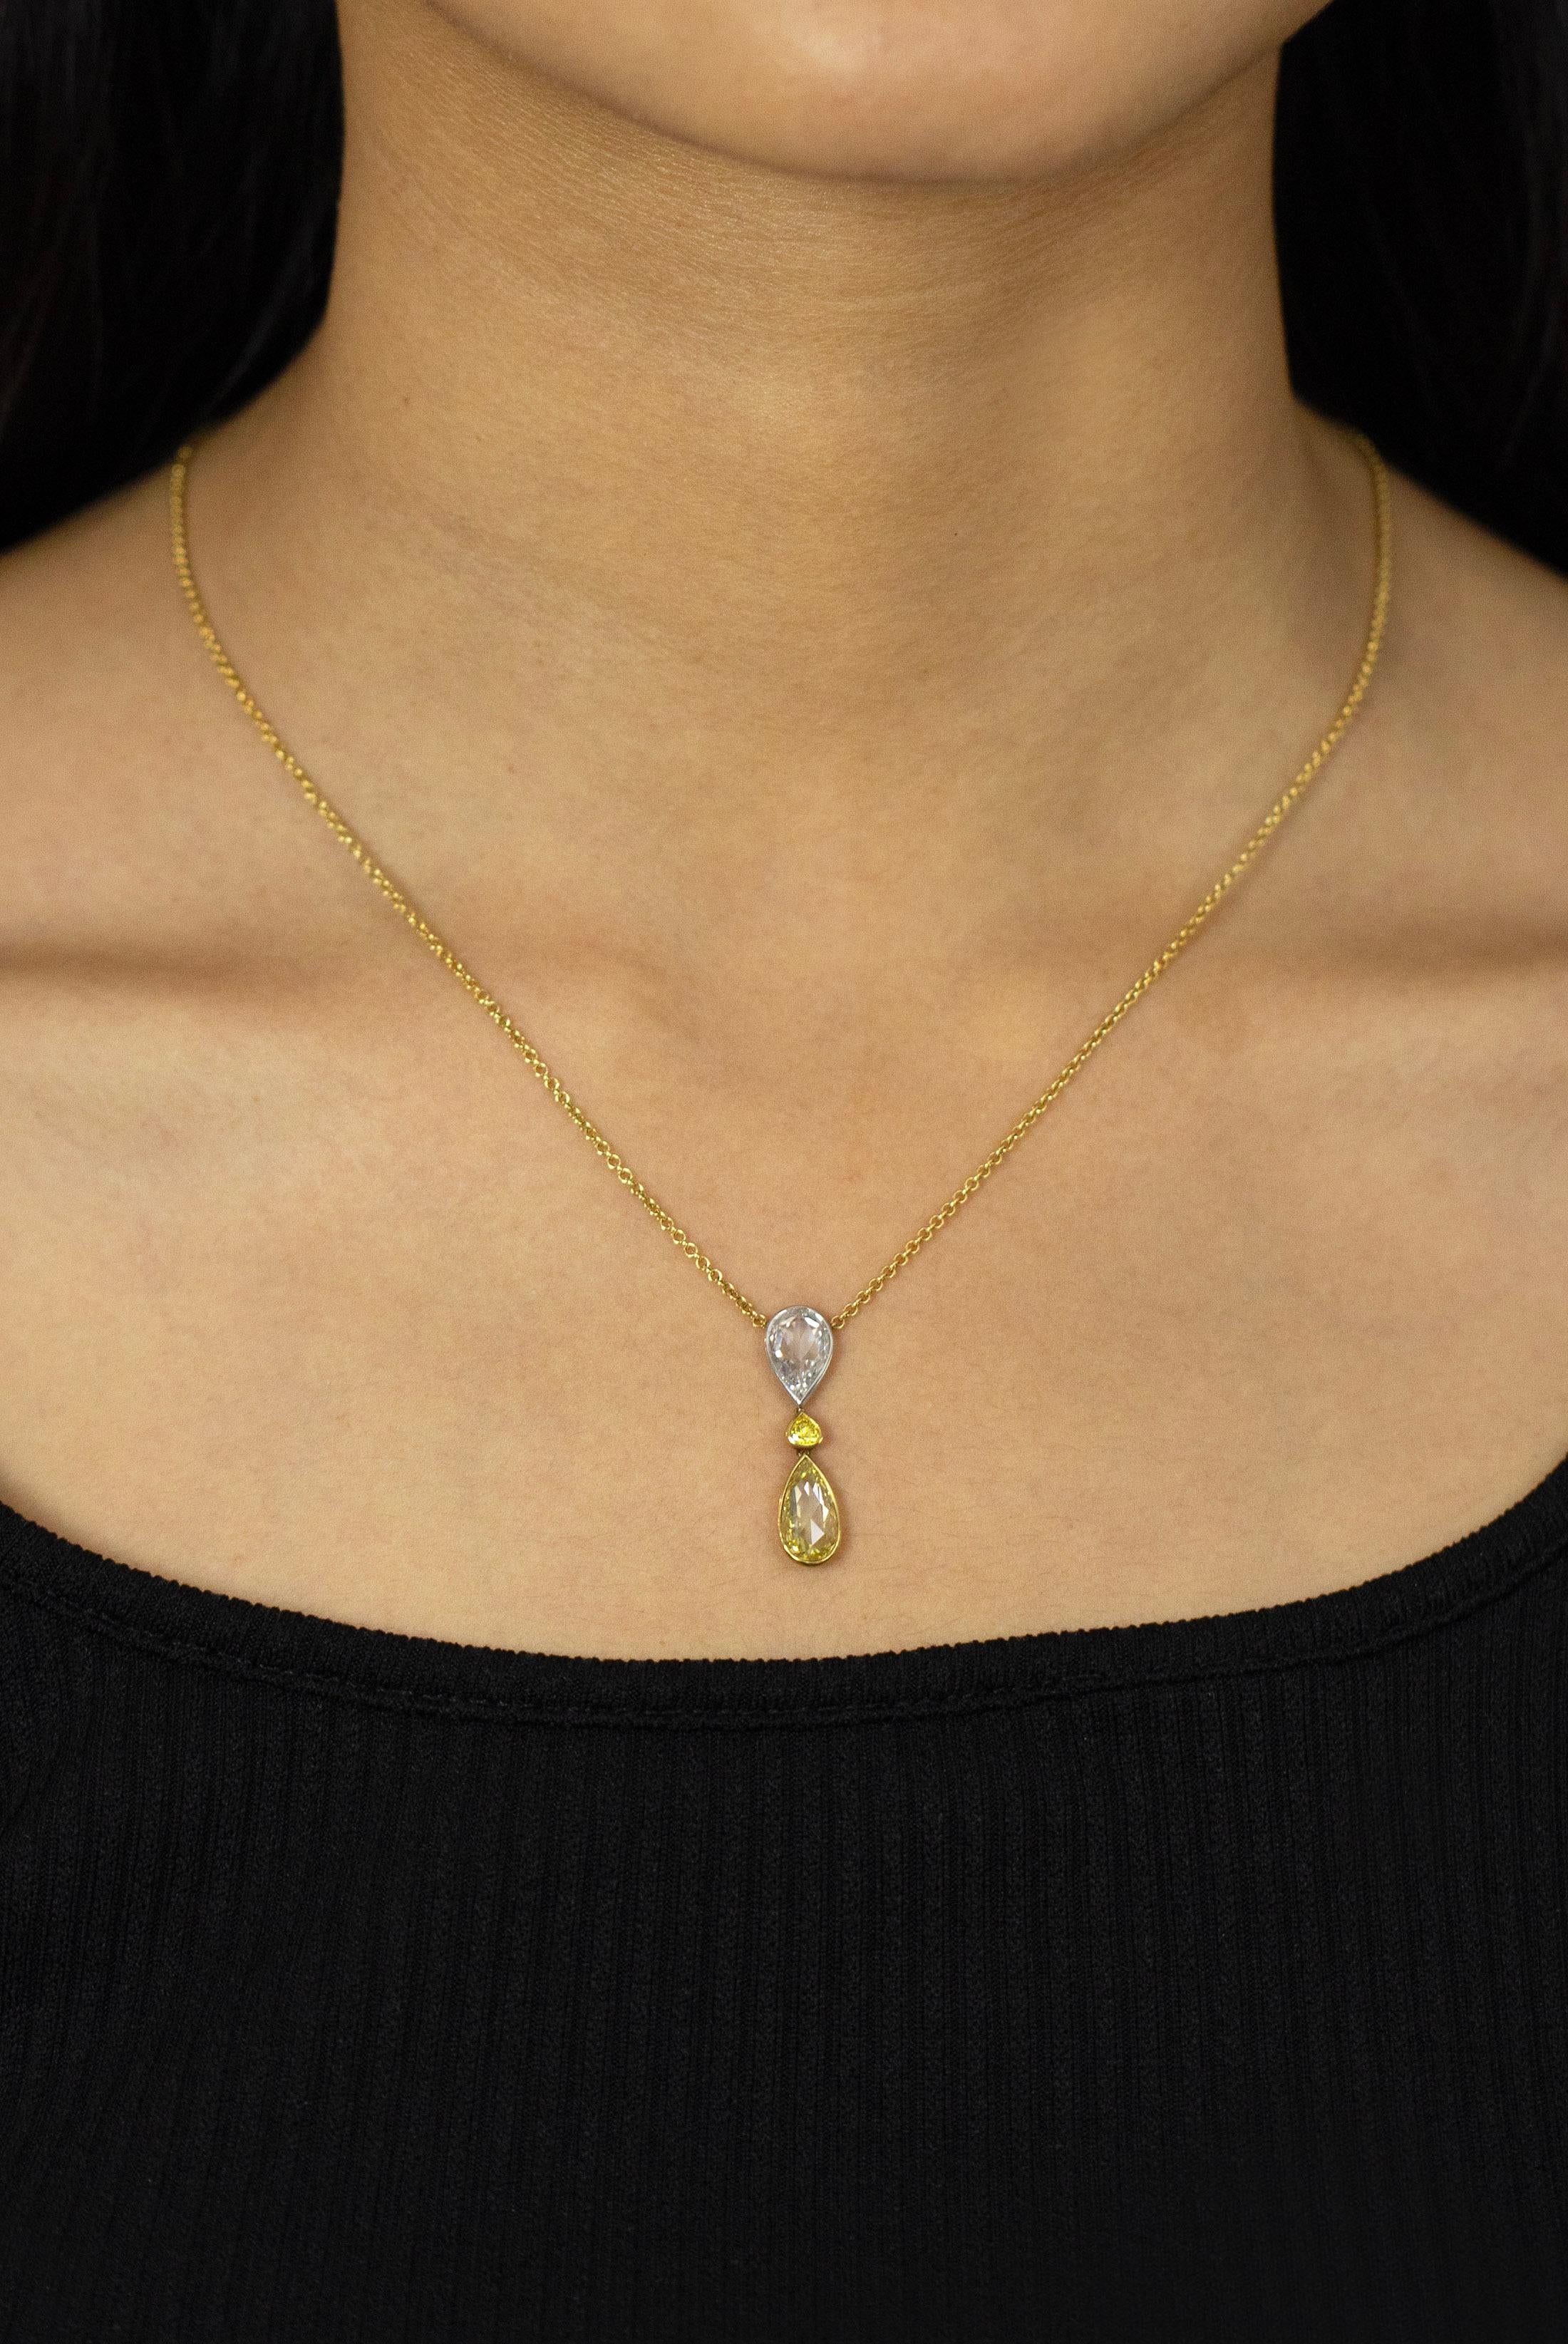 This color-rich and beautiful pendant necklace showcases a 1.18 carats pear shape diamond certified by GIA as fancy intense yellow diamond and VVS2 in clarity, bazel set in 18k yellow gold. Suspended on an inverted 1.15 carats pear shape diamond